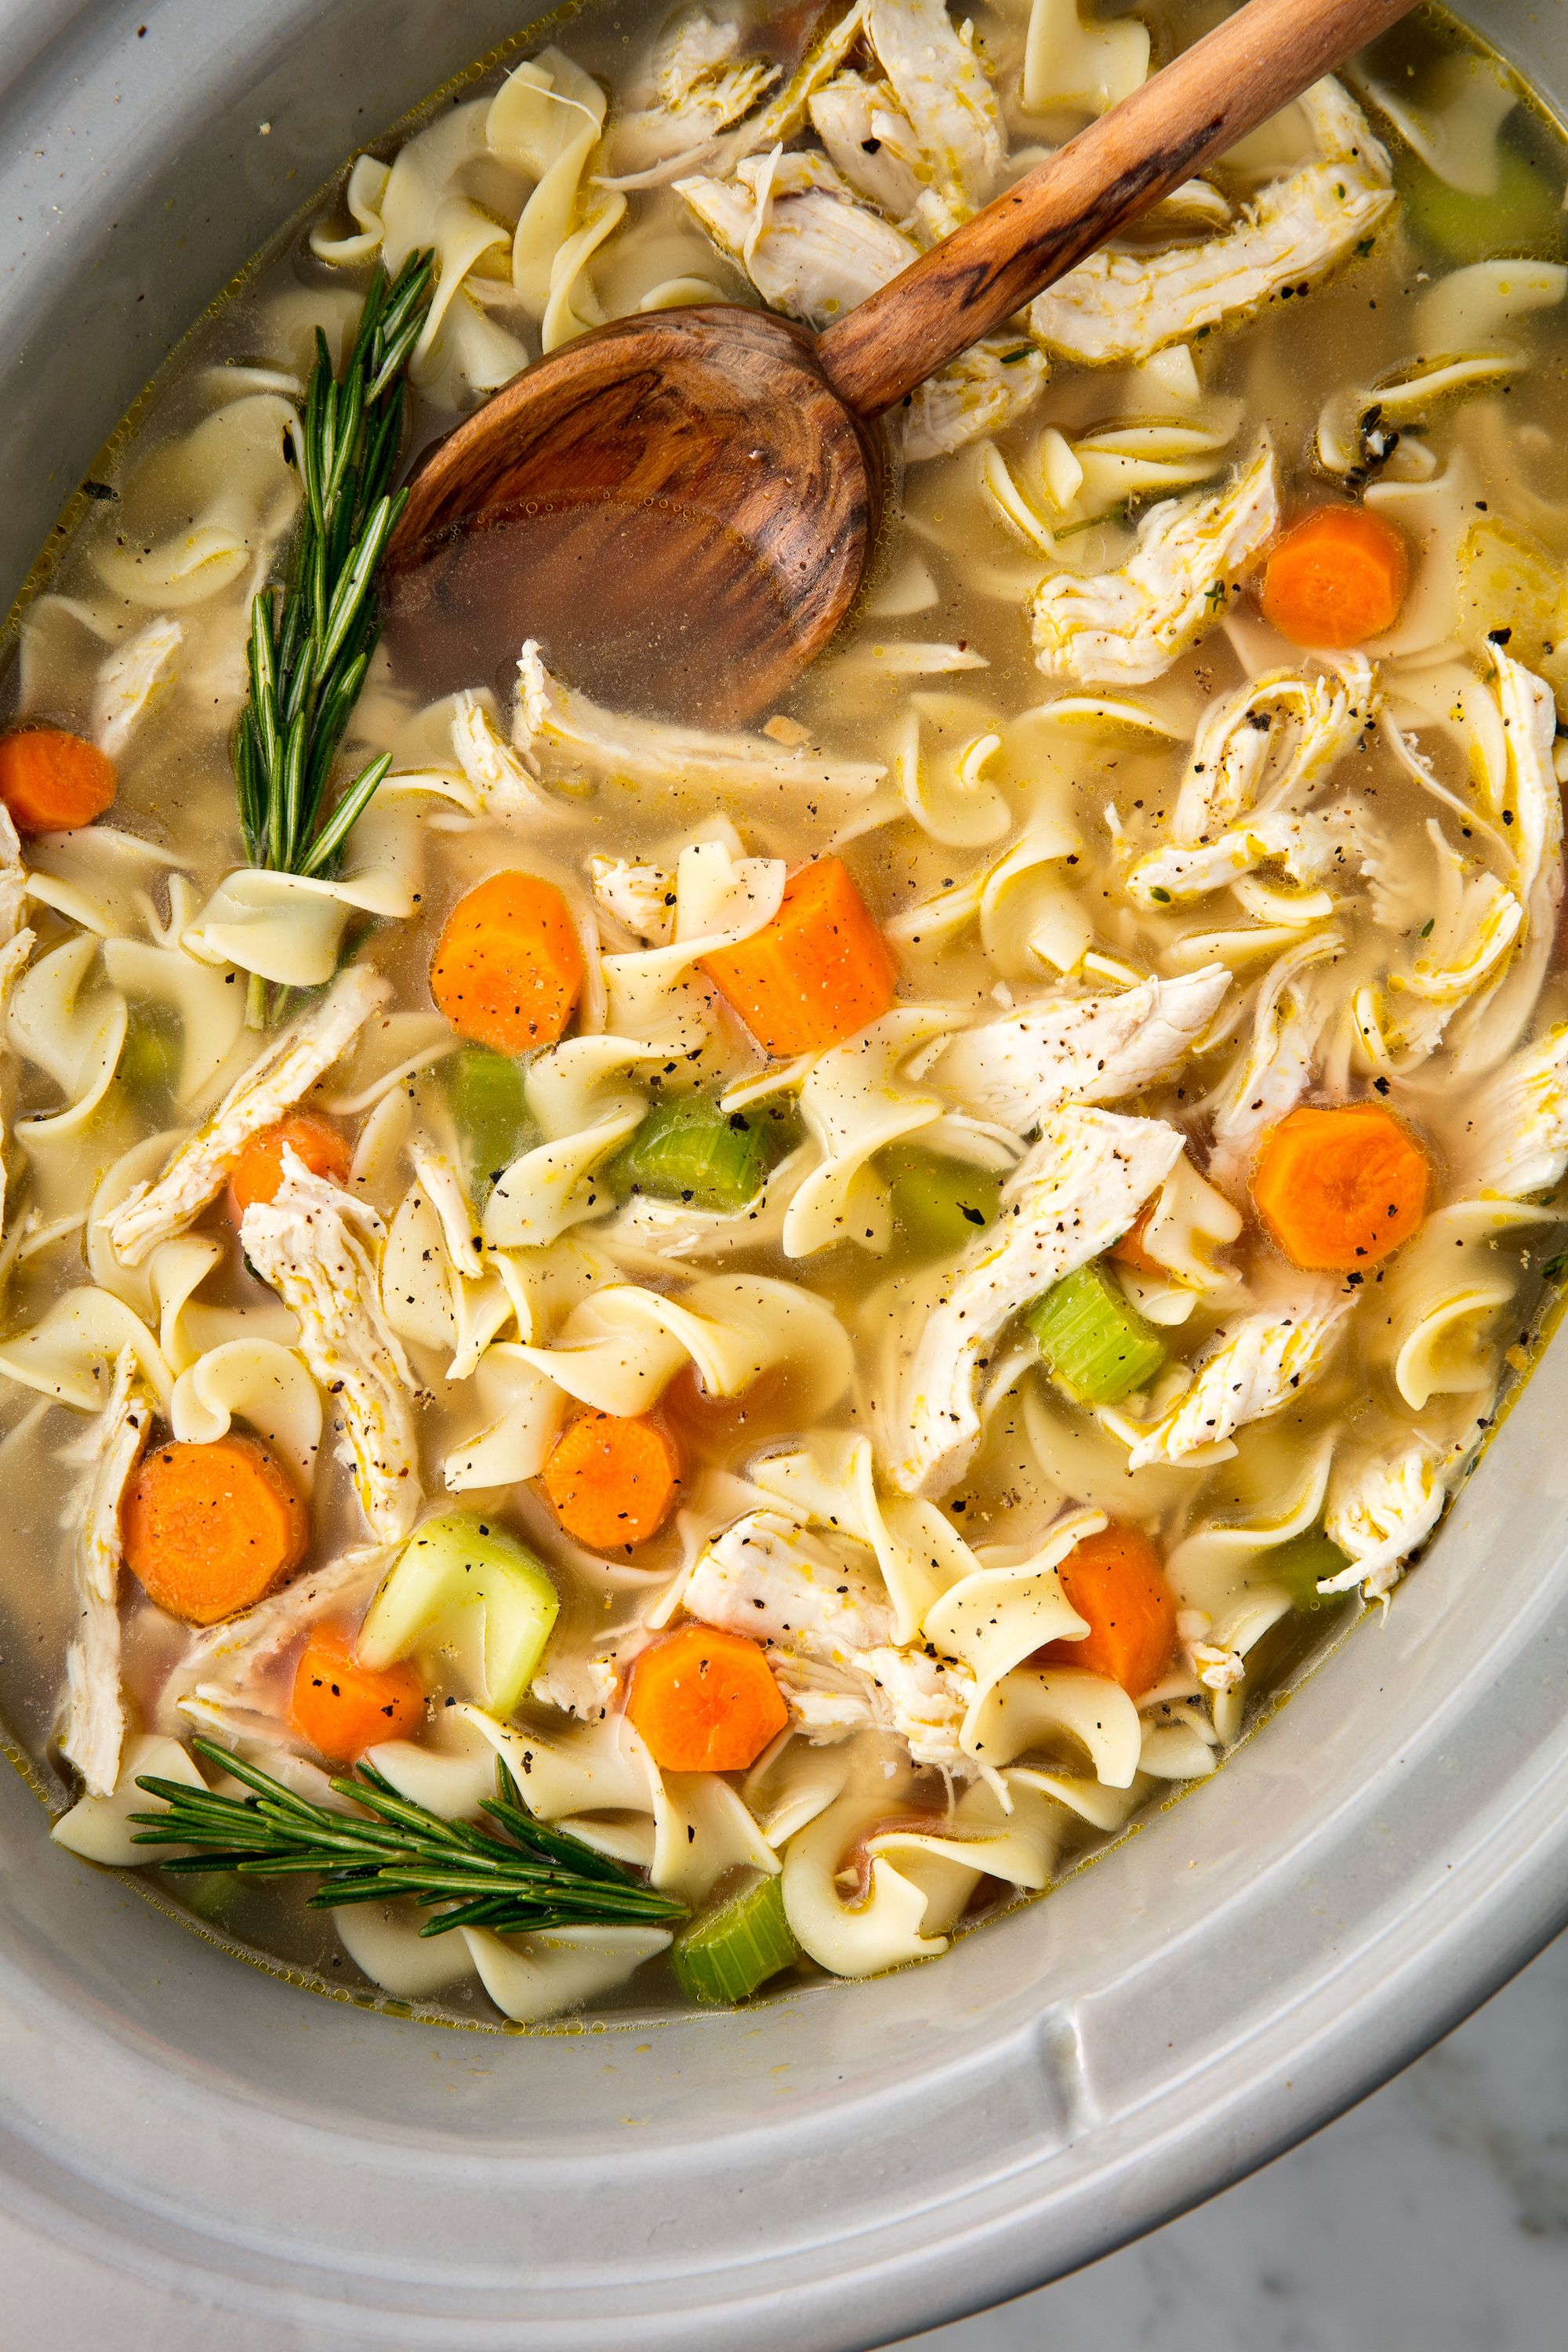 Easy Crockpot Chicken Noodle Soup Recipe - How to Make Slow Cooker ...